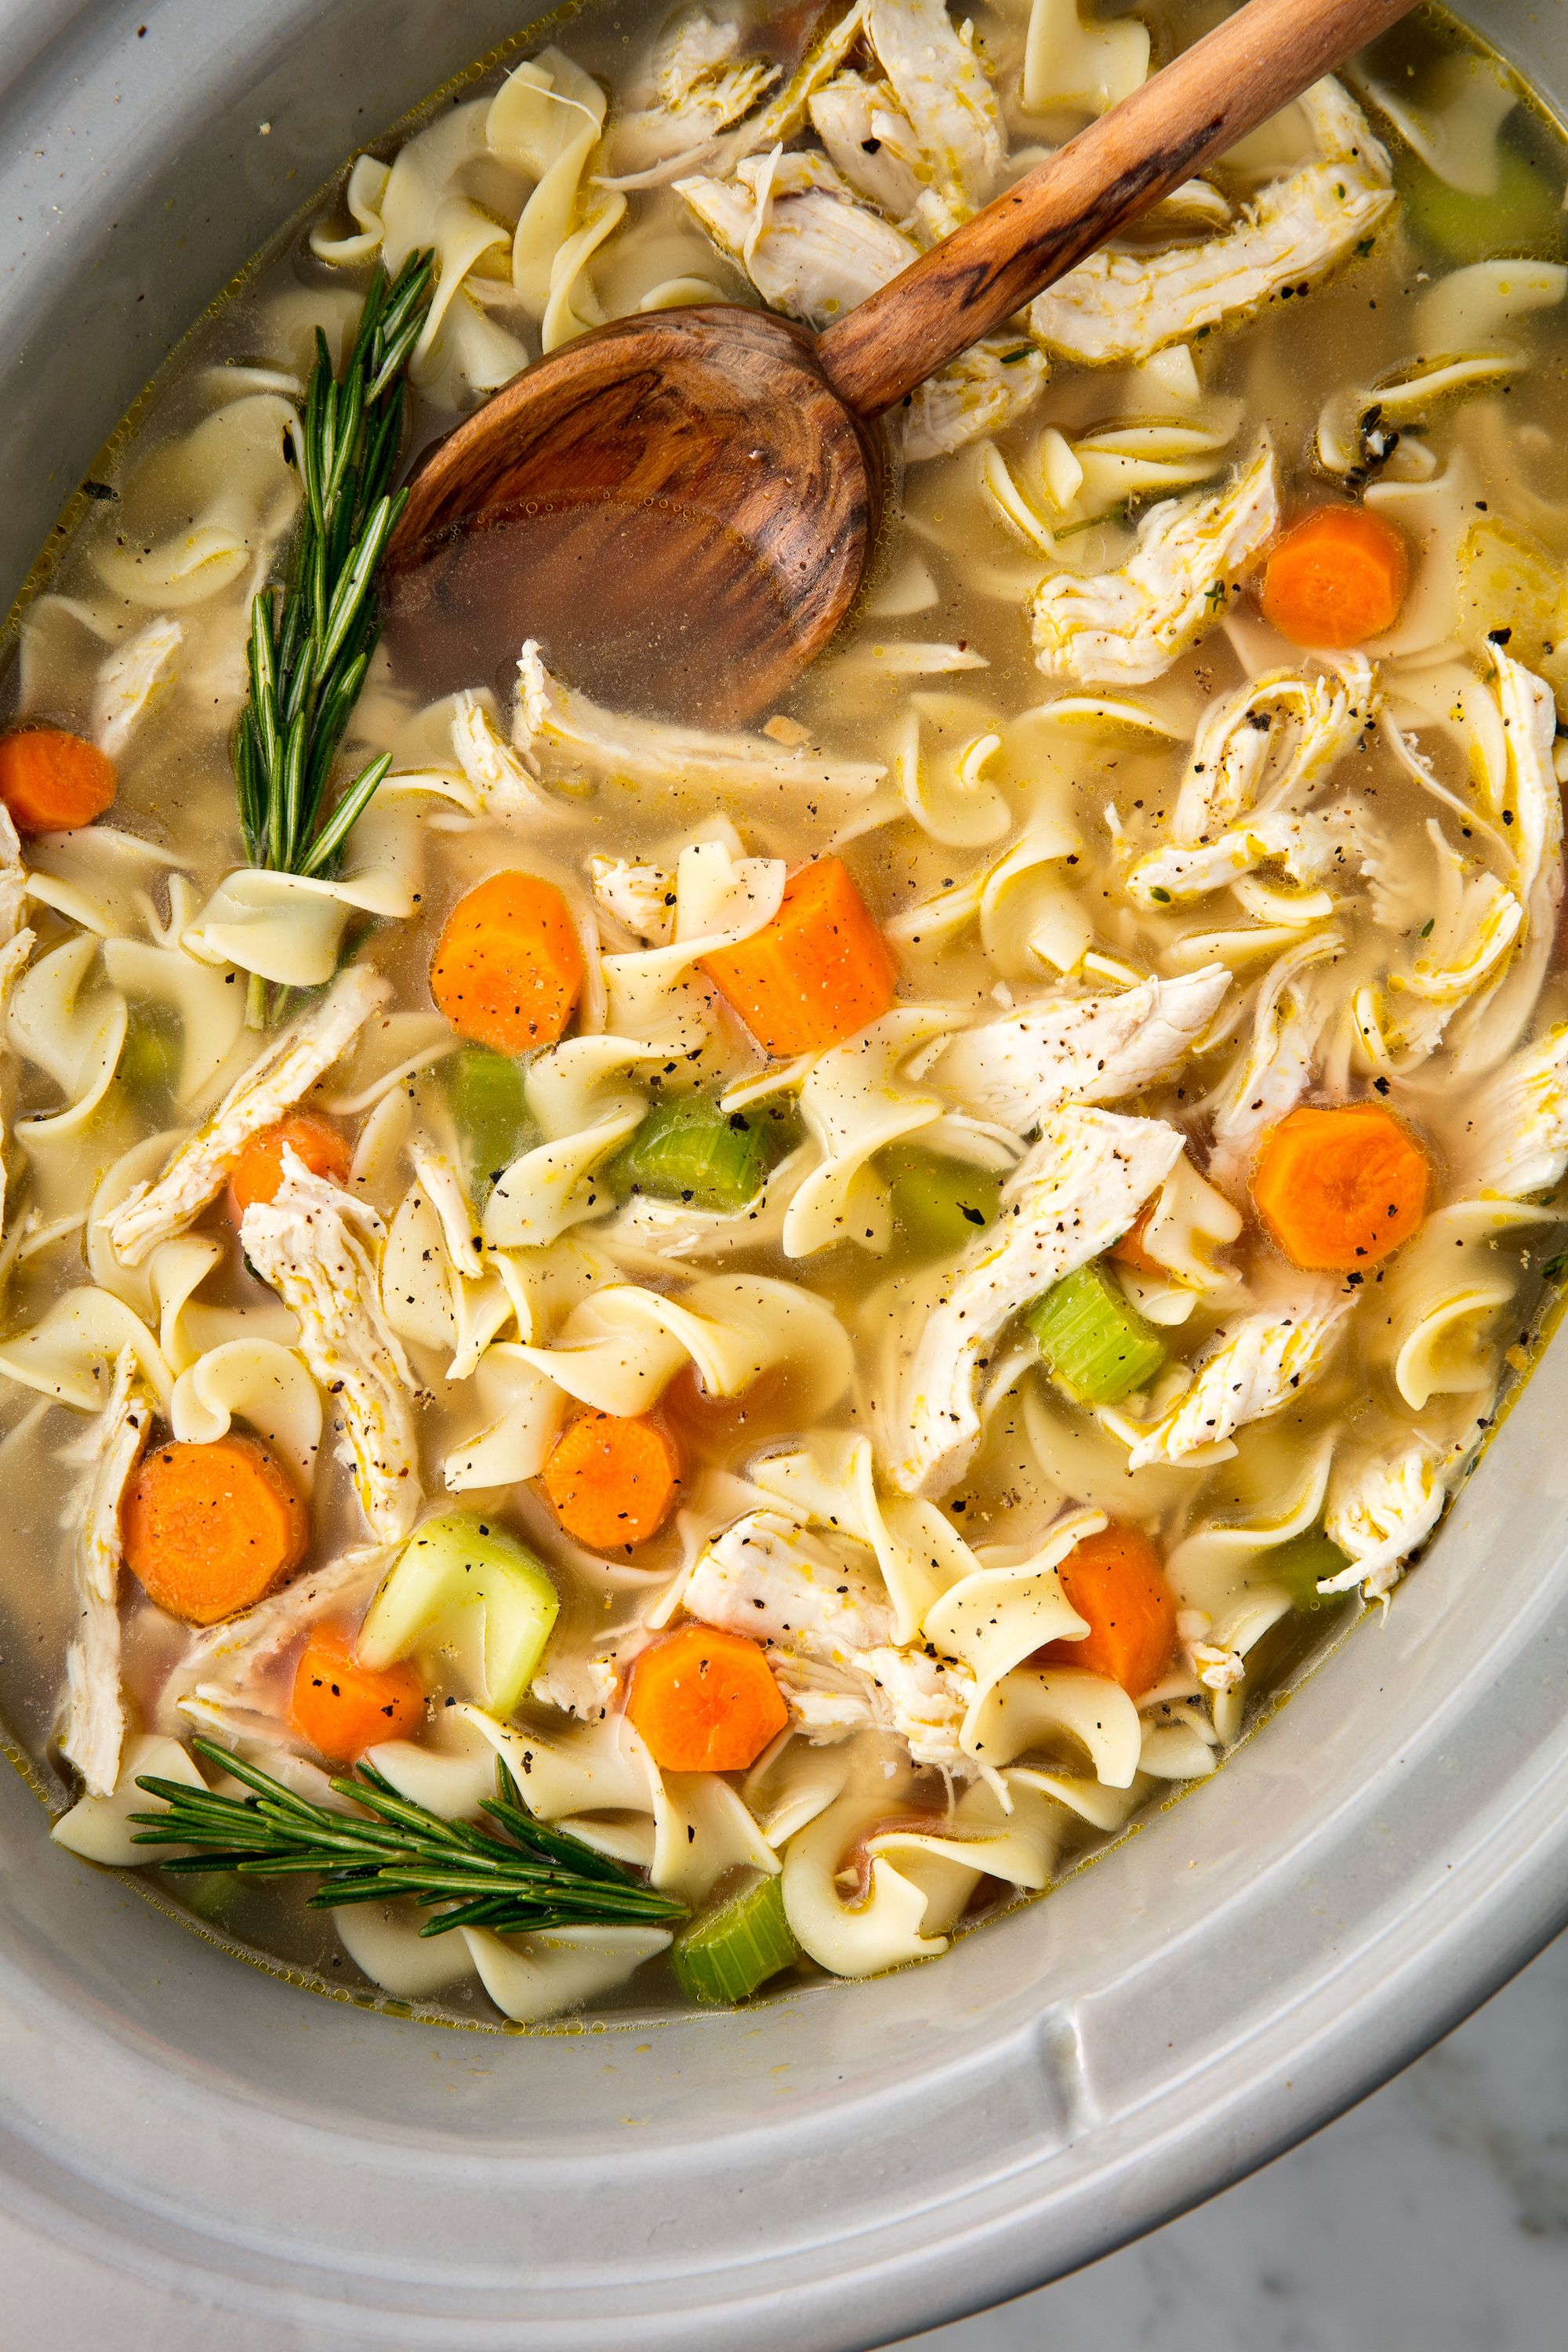 Easy Crockpot Chicken Noodle Soup Recipe - How to Make Slow Cooker ...